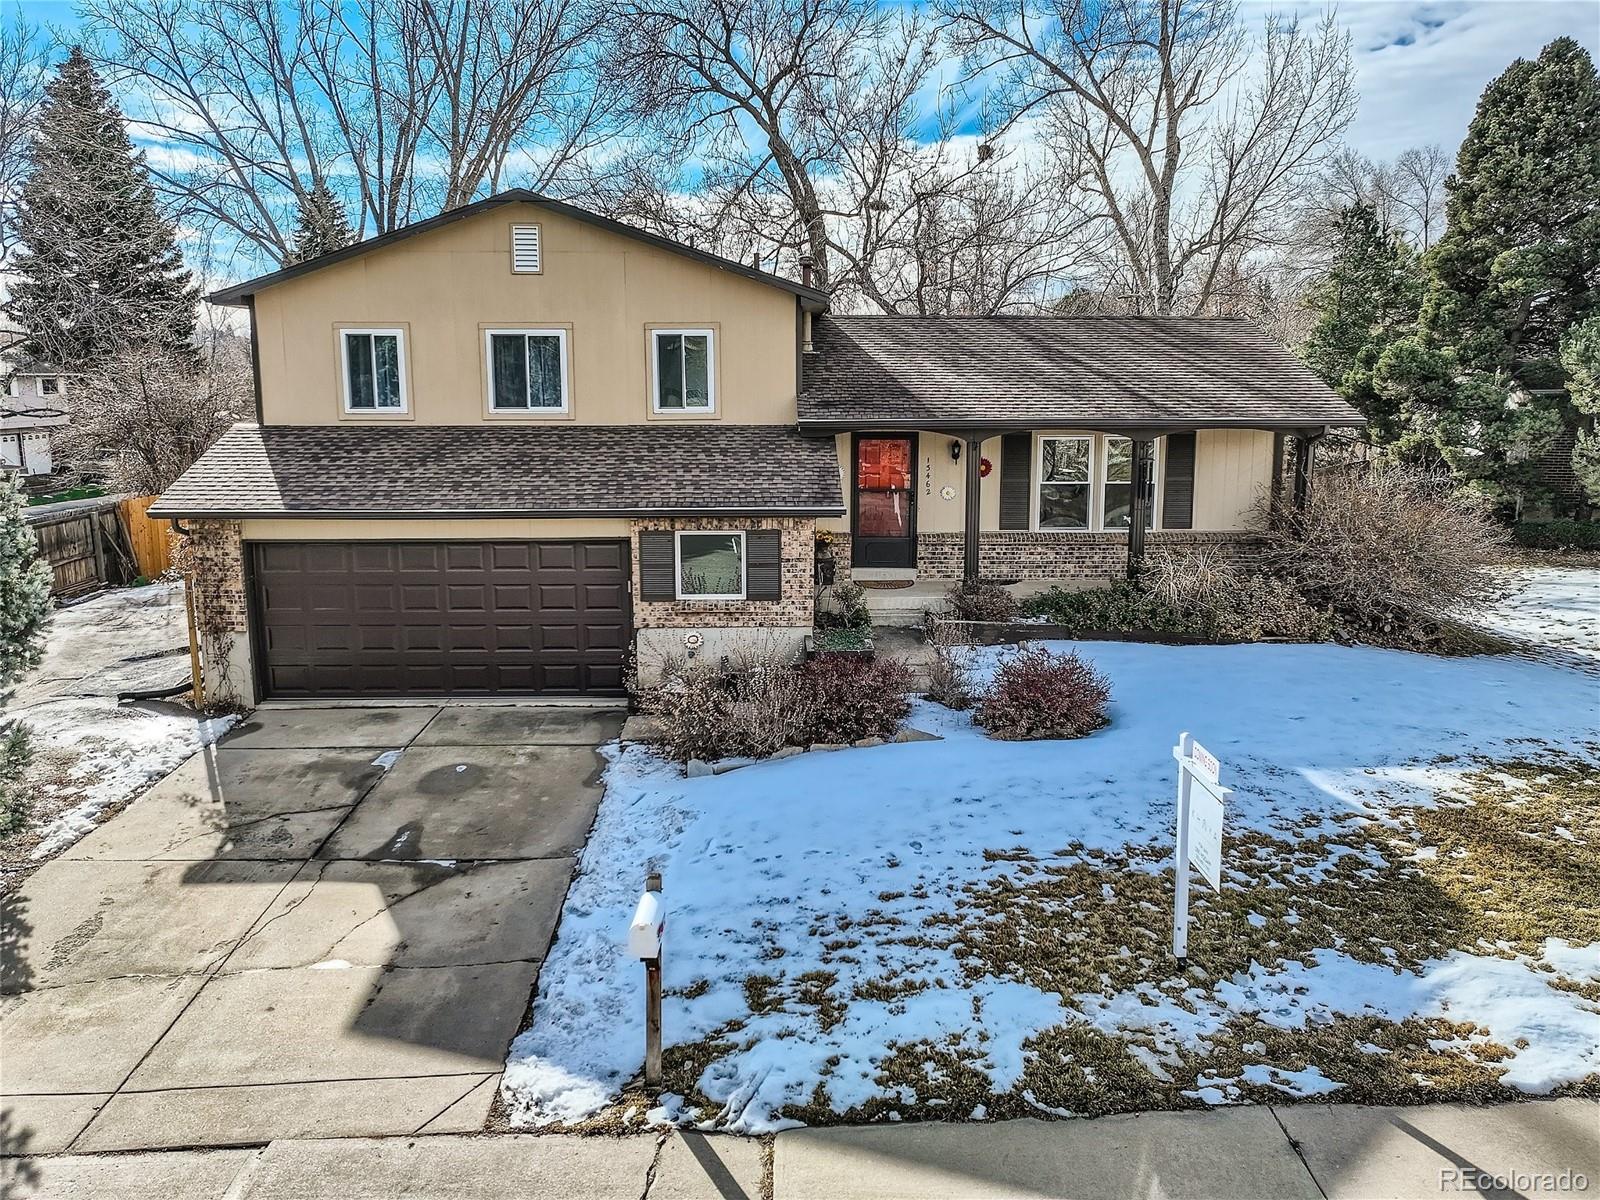 13462 W 70th Place, arvada MLS: 8262537 Beds: 3 Baths: 3 Price: $680,000